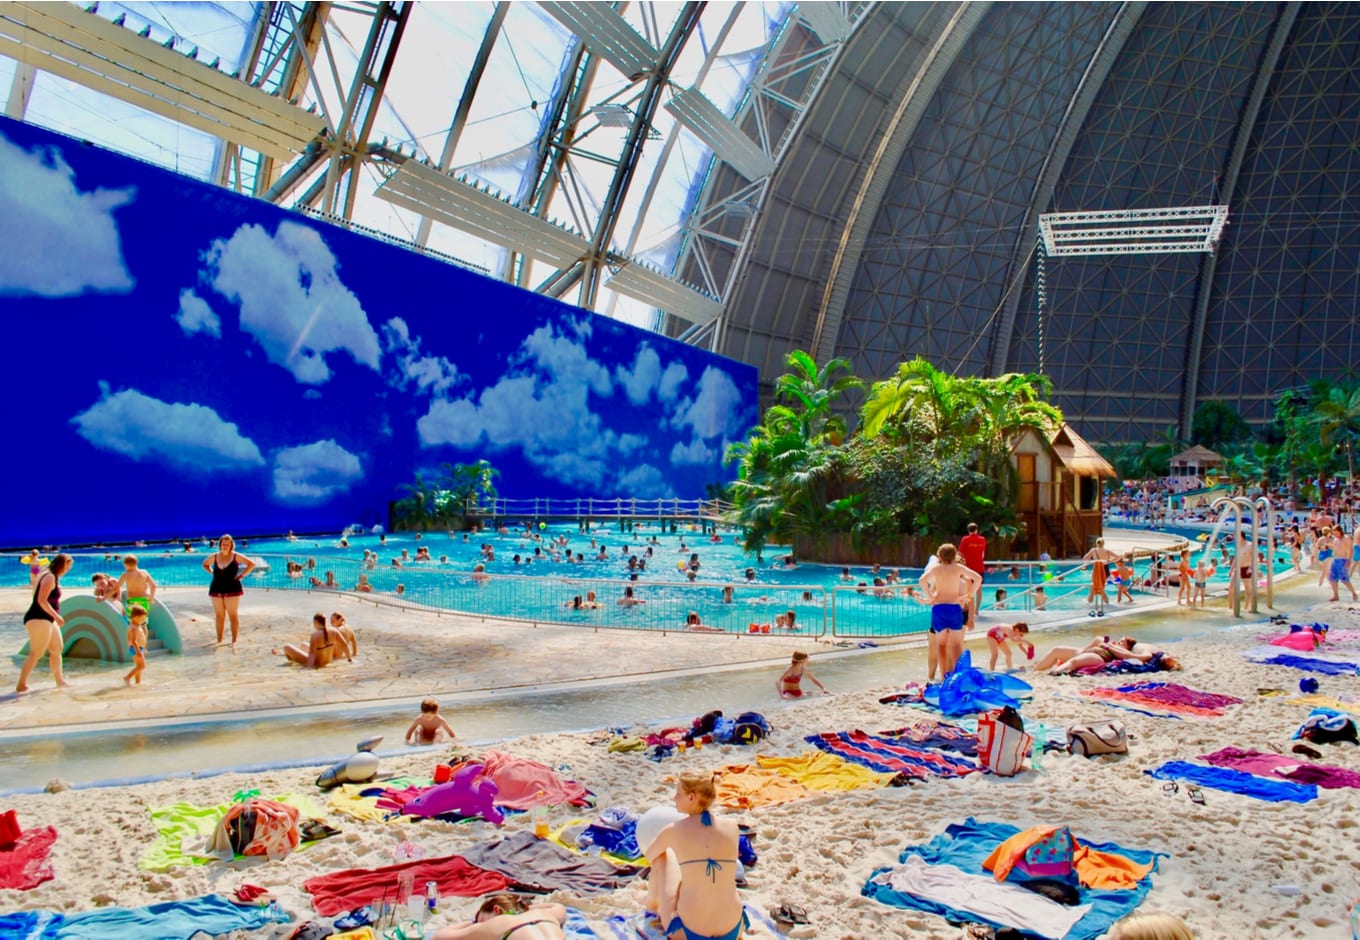 View the sandy beach by the pool at the Tropical Islands Water Park, in Germany.